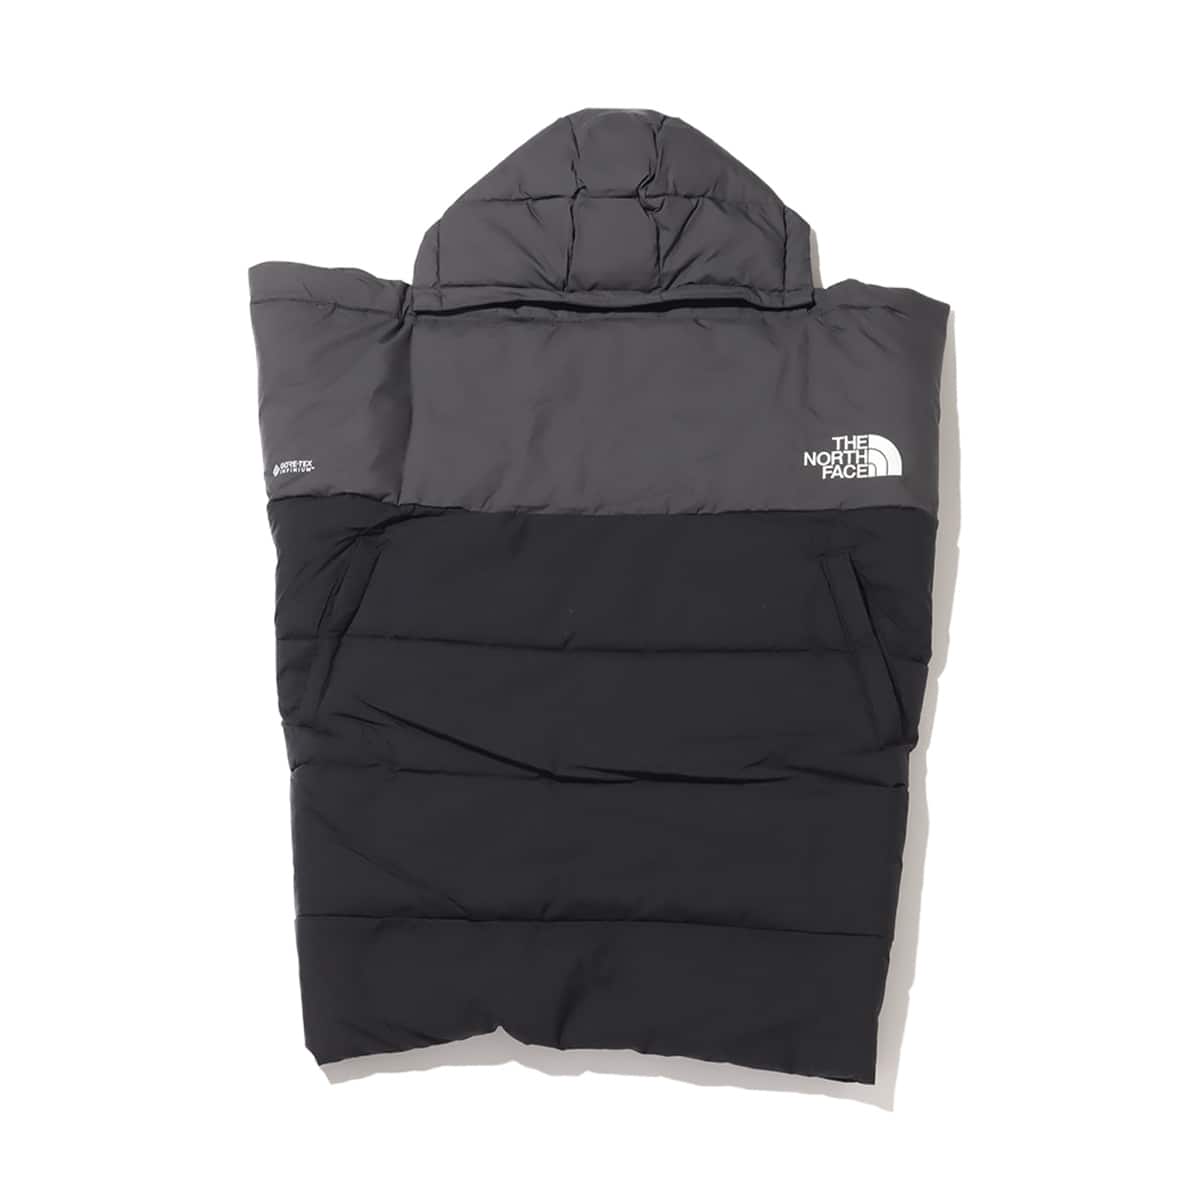 THE NORTH FACE BABY MULTI SHELL BLANKET BLACK